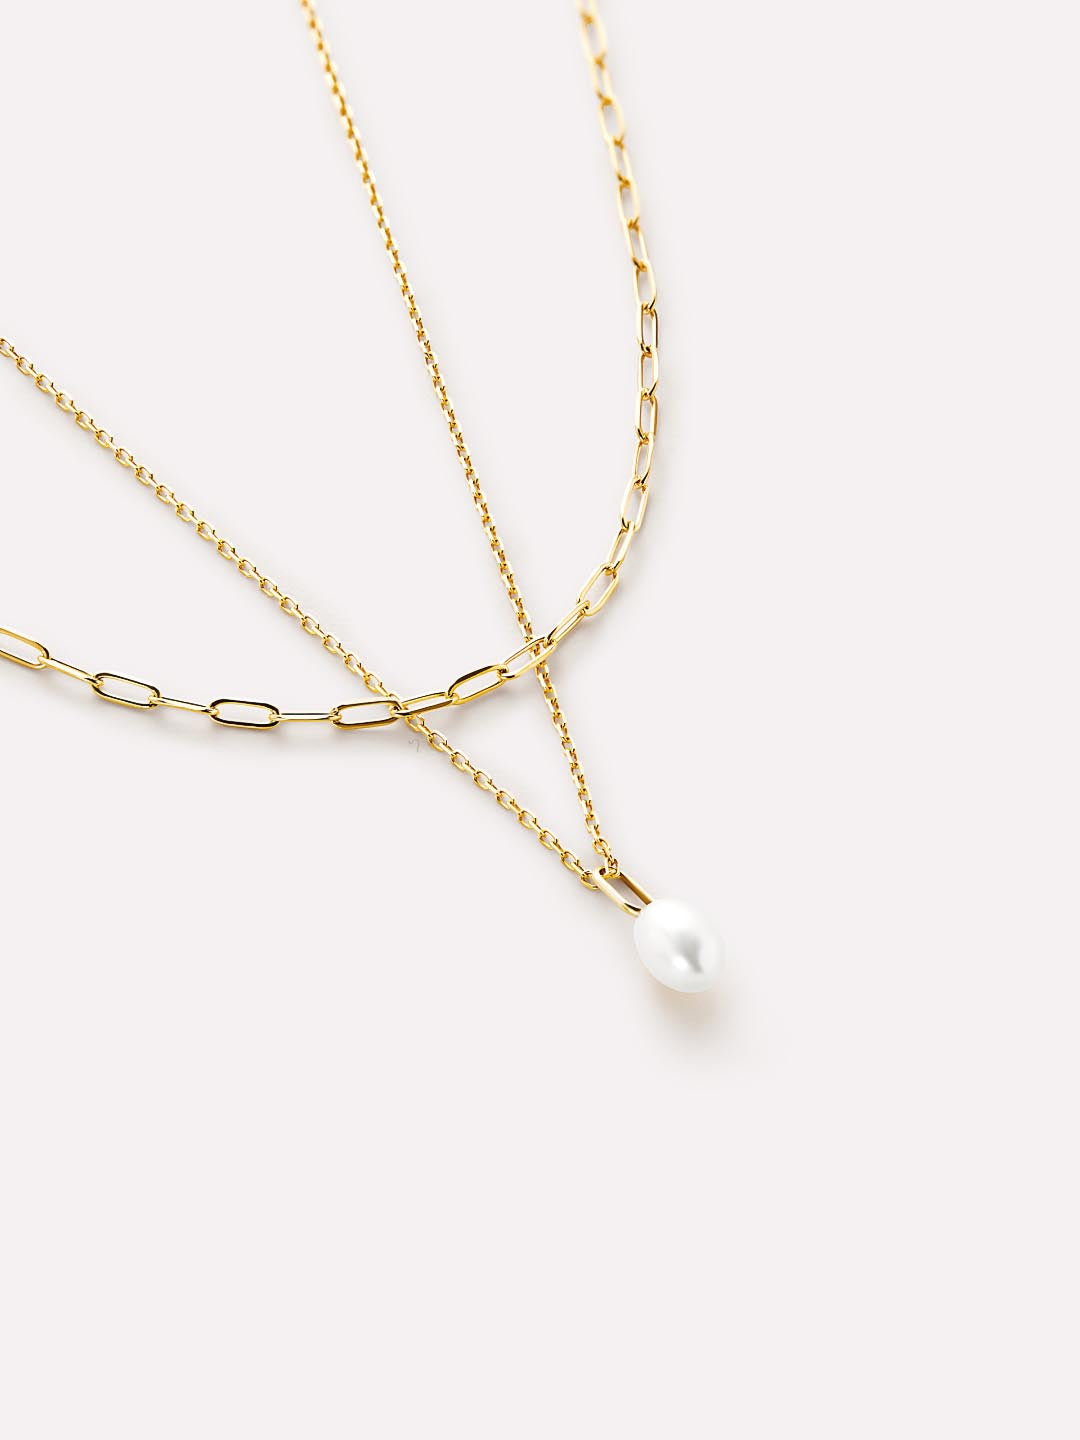 Pearl necklace in 14k yellow gold | KLENOTA